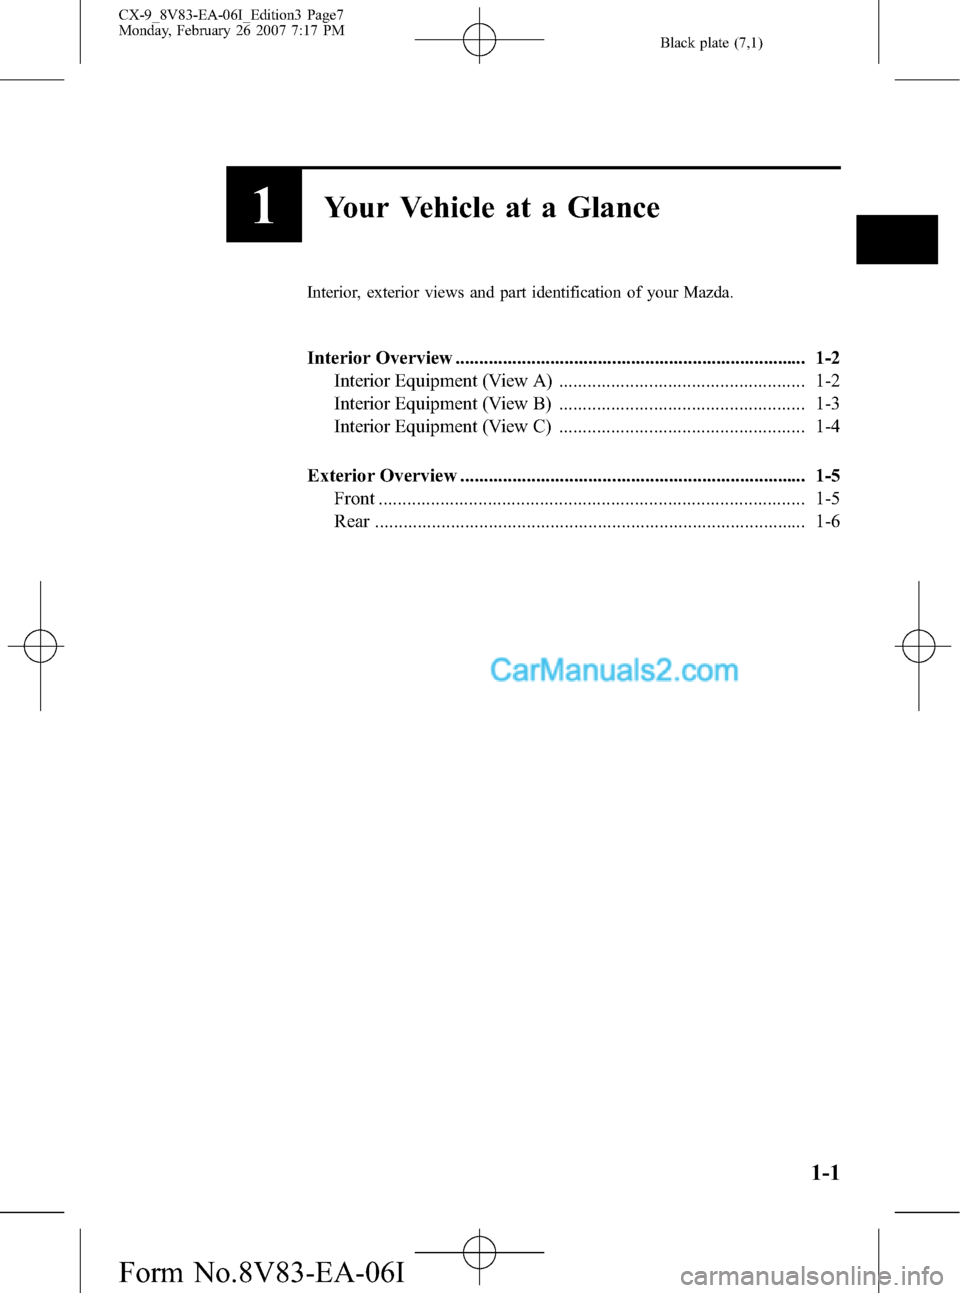 MAZDA MODEL CX-9 2007  Owners Manual (in English) Black plate (7,1)
1Your Vehicle at a Glance
Interior, exterior views and part identification of your Mazda.
Interior Overview ..........................................................................